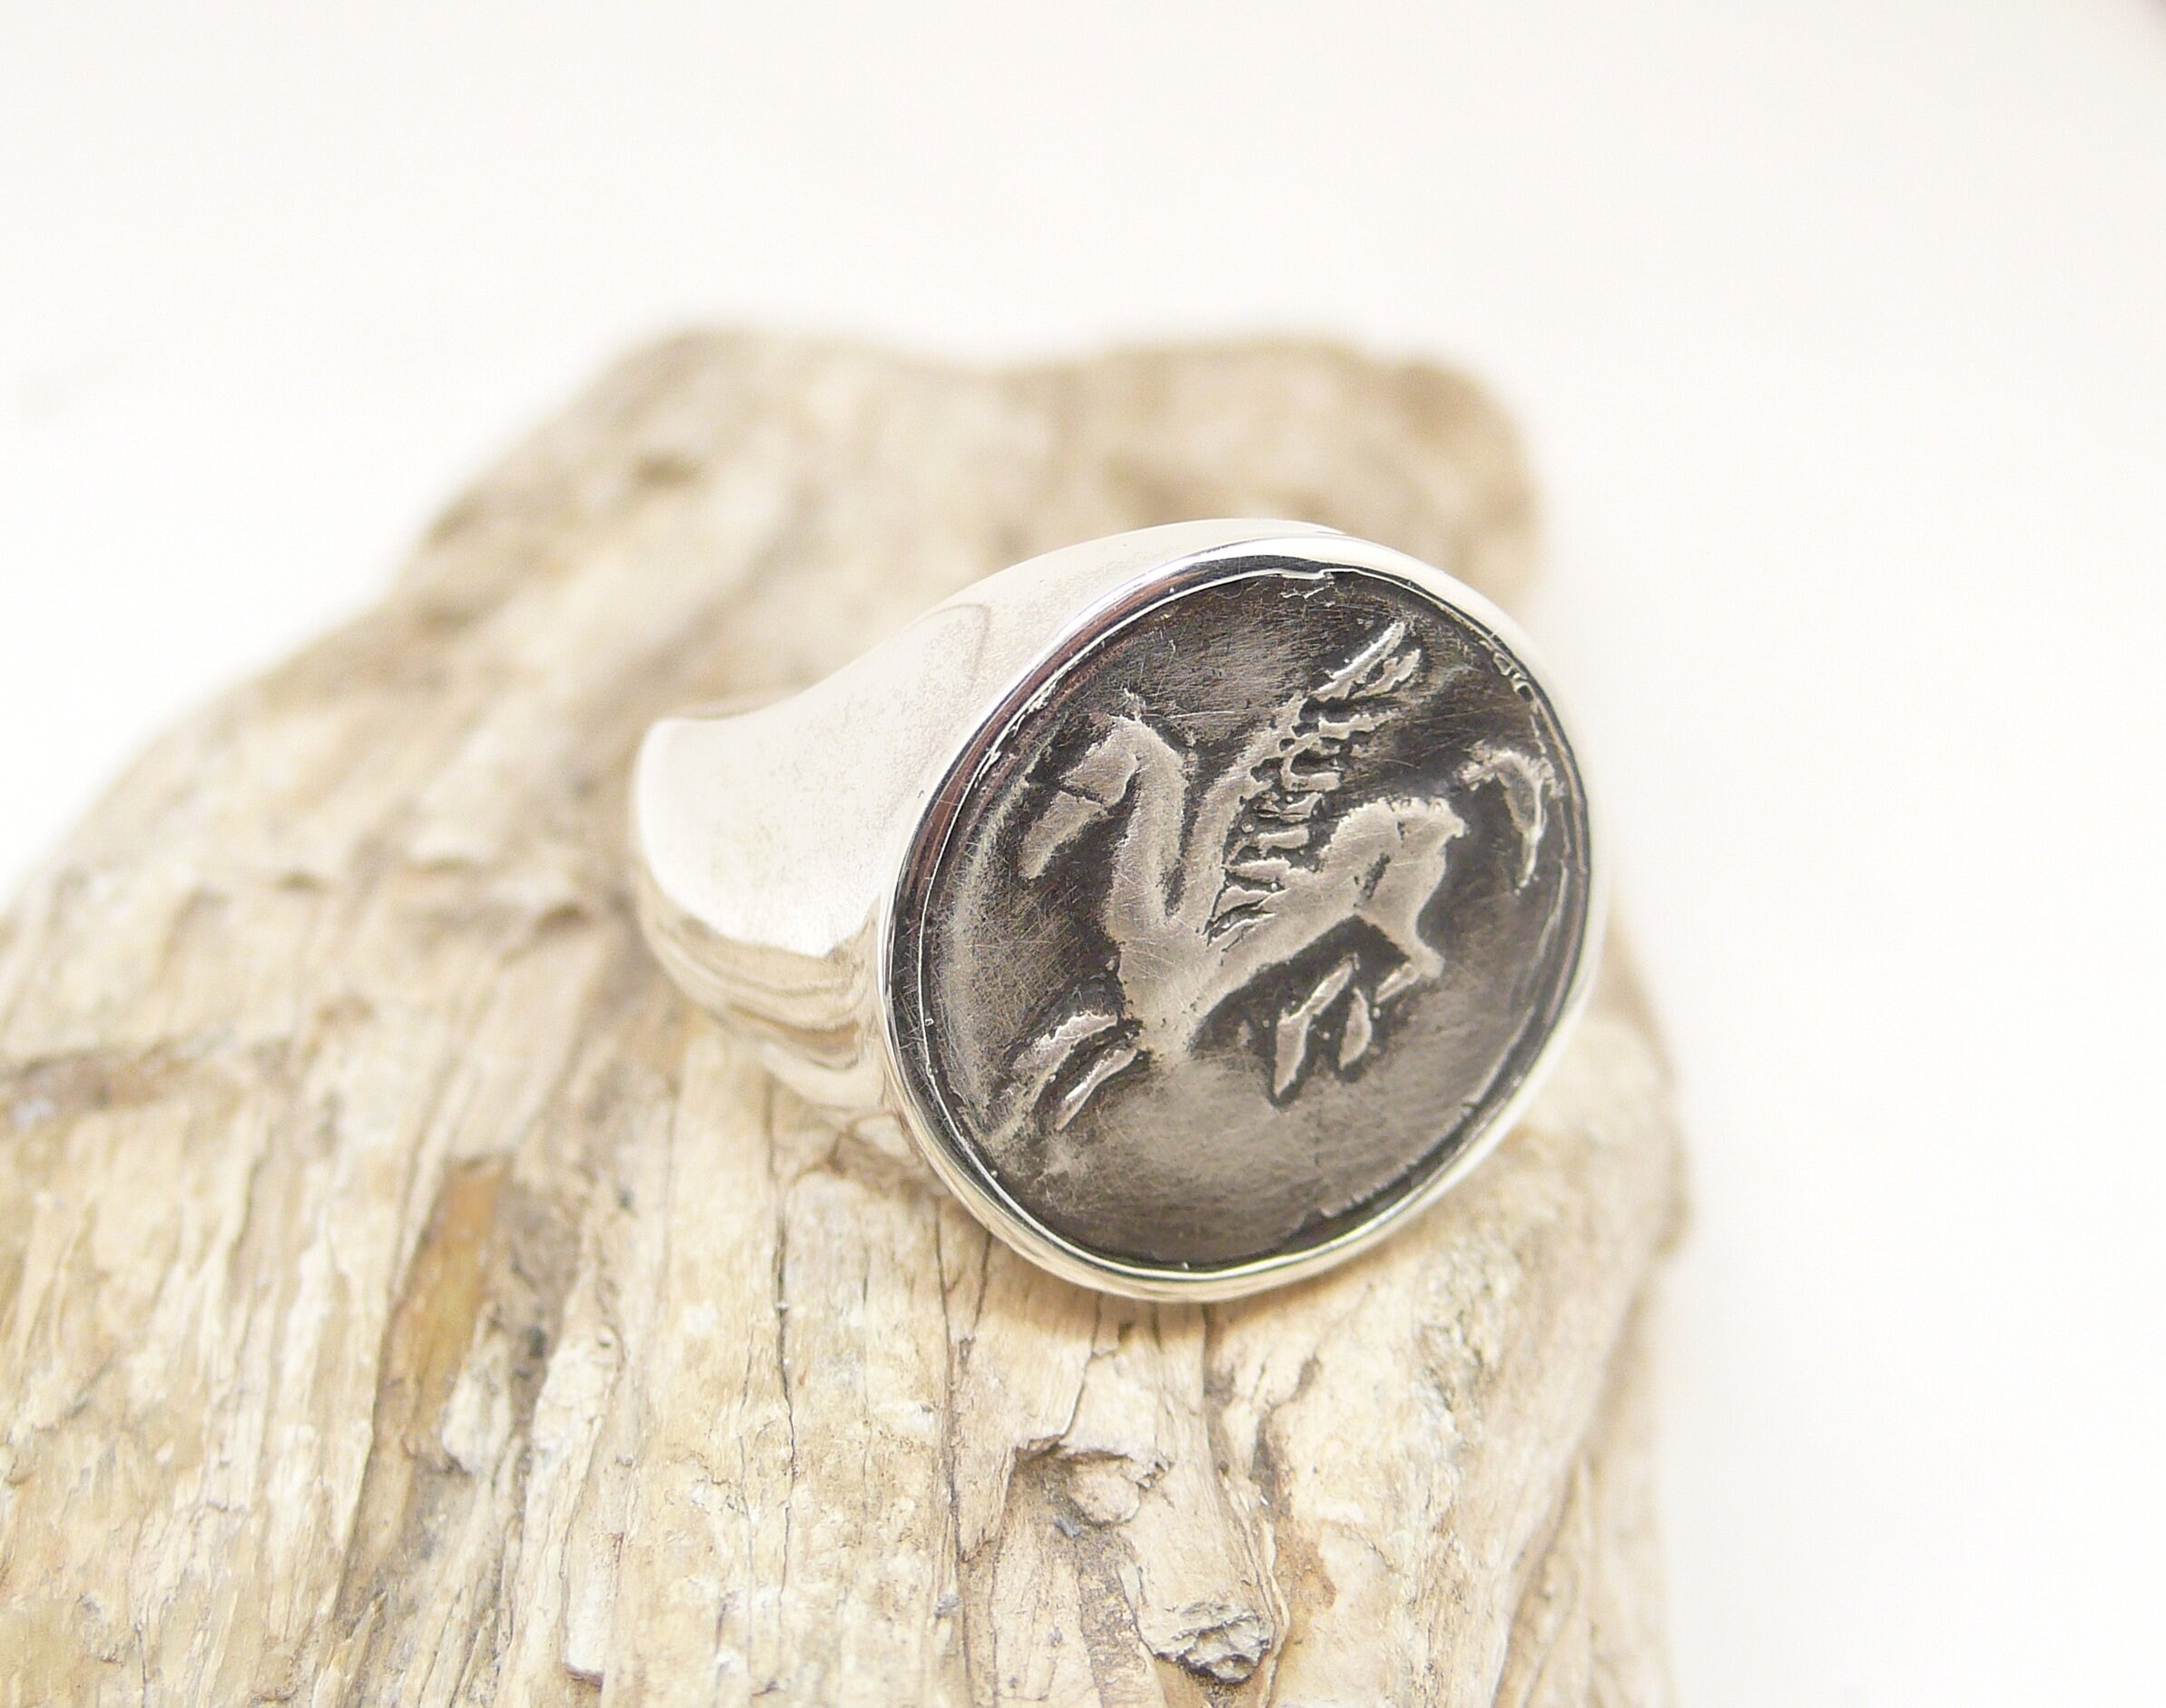 Pegasus Polished Brass Signet Coin Ring for Men and Women 18mm Round Made in All Size Flying Horse Chevaliere Homme Femme Siegelring